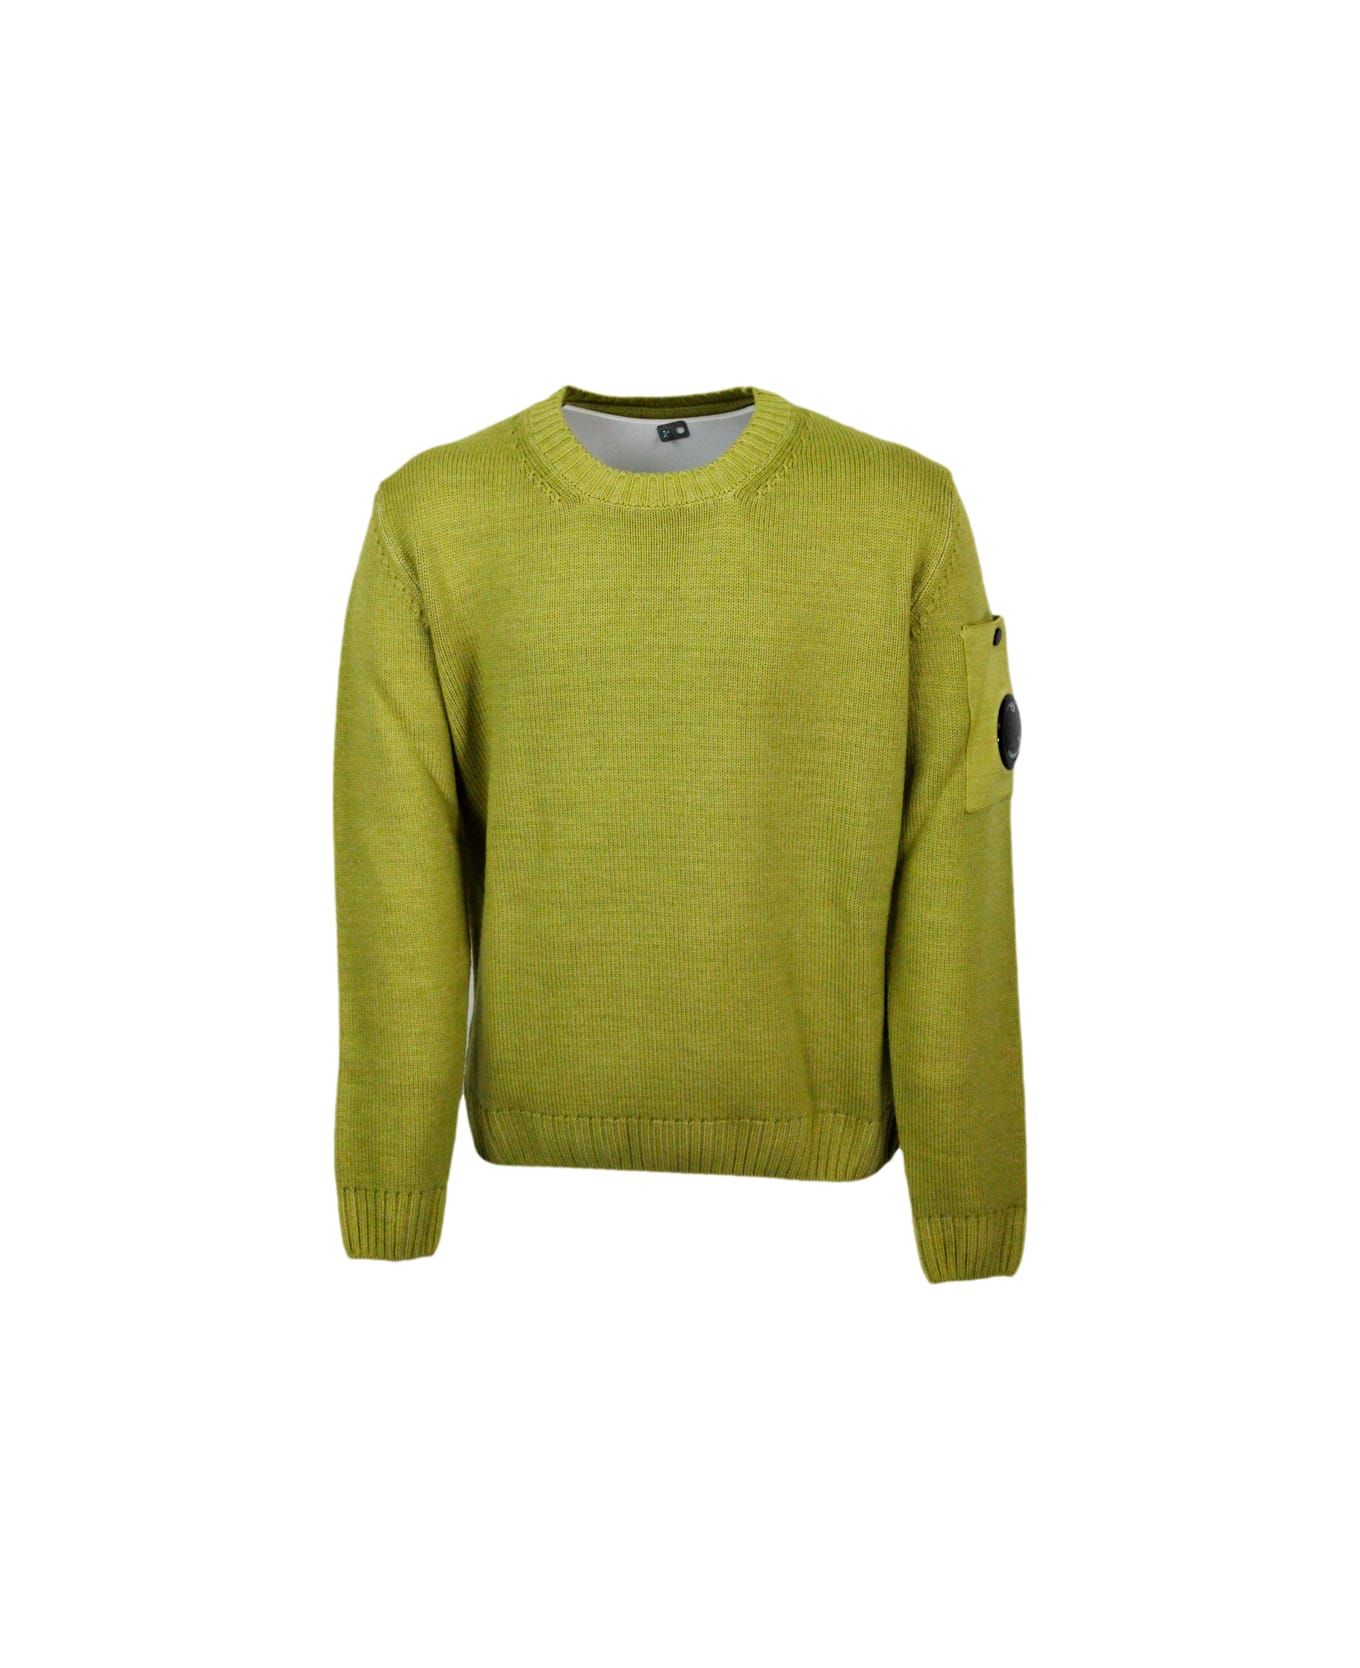 C.P. Company Crewneck Wool Sweater With Logo On The Sleeve In Vanisè Color - Lime